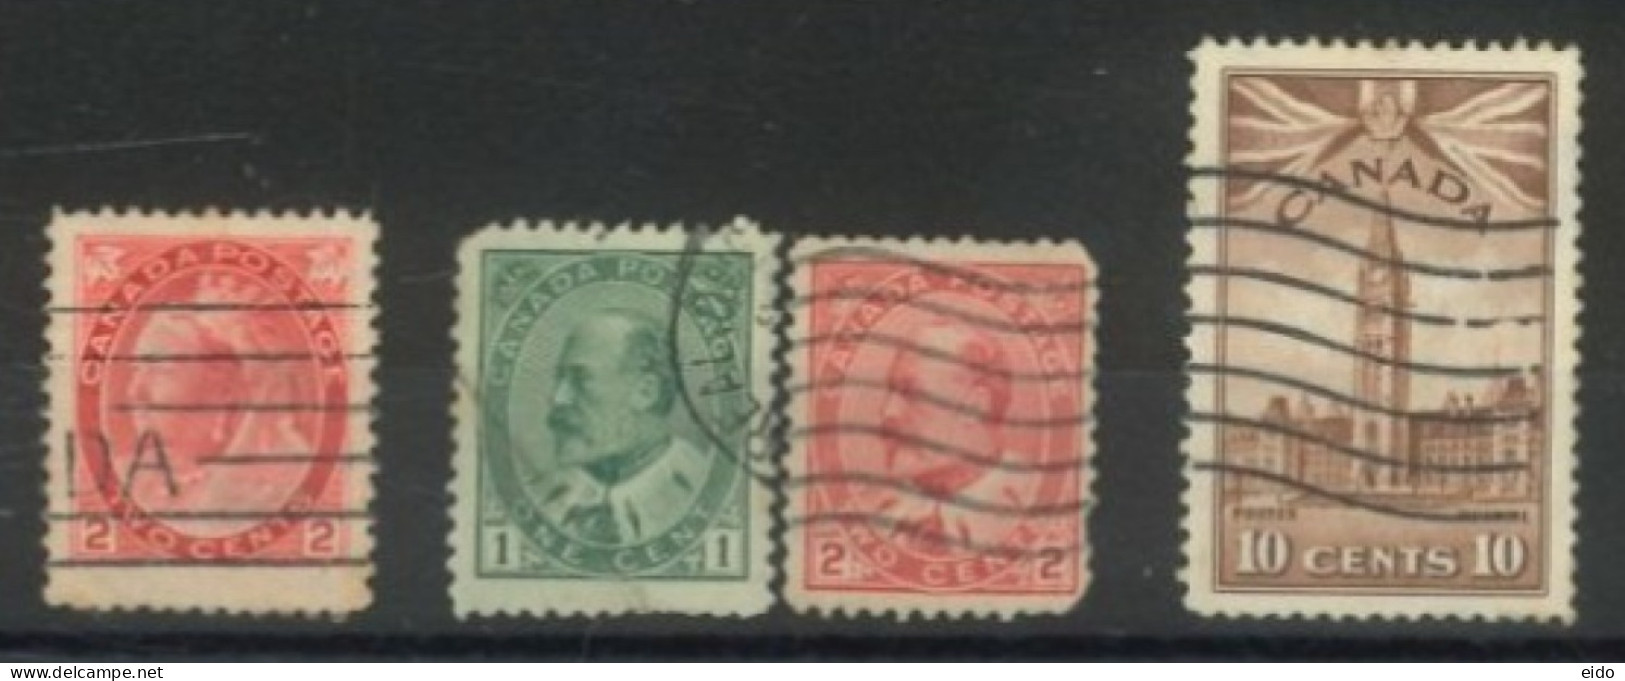 CANADA -  STAMPS SET OF 4, USED. - Usati